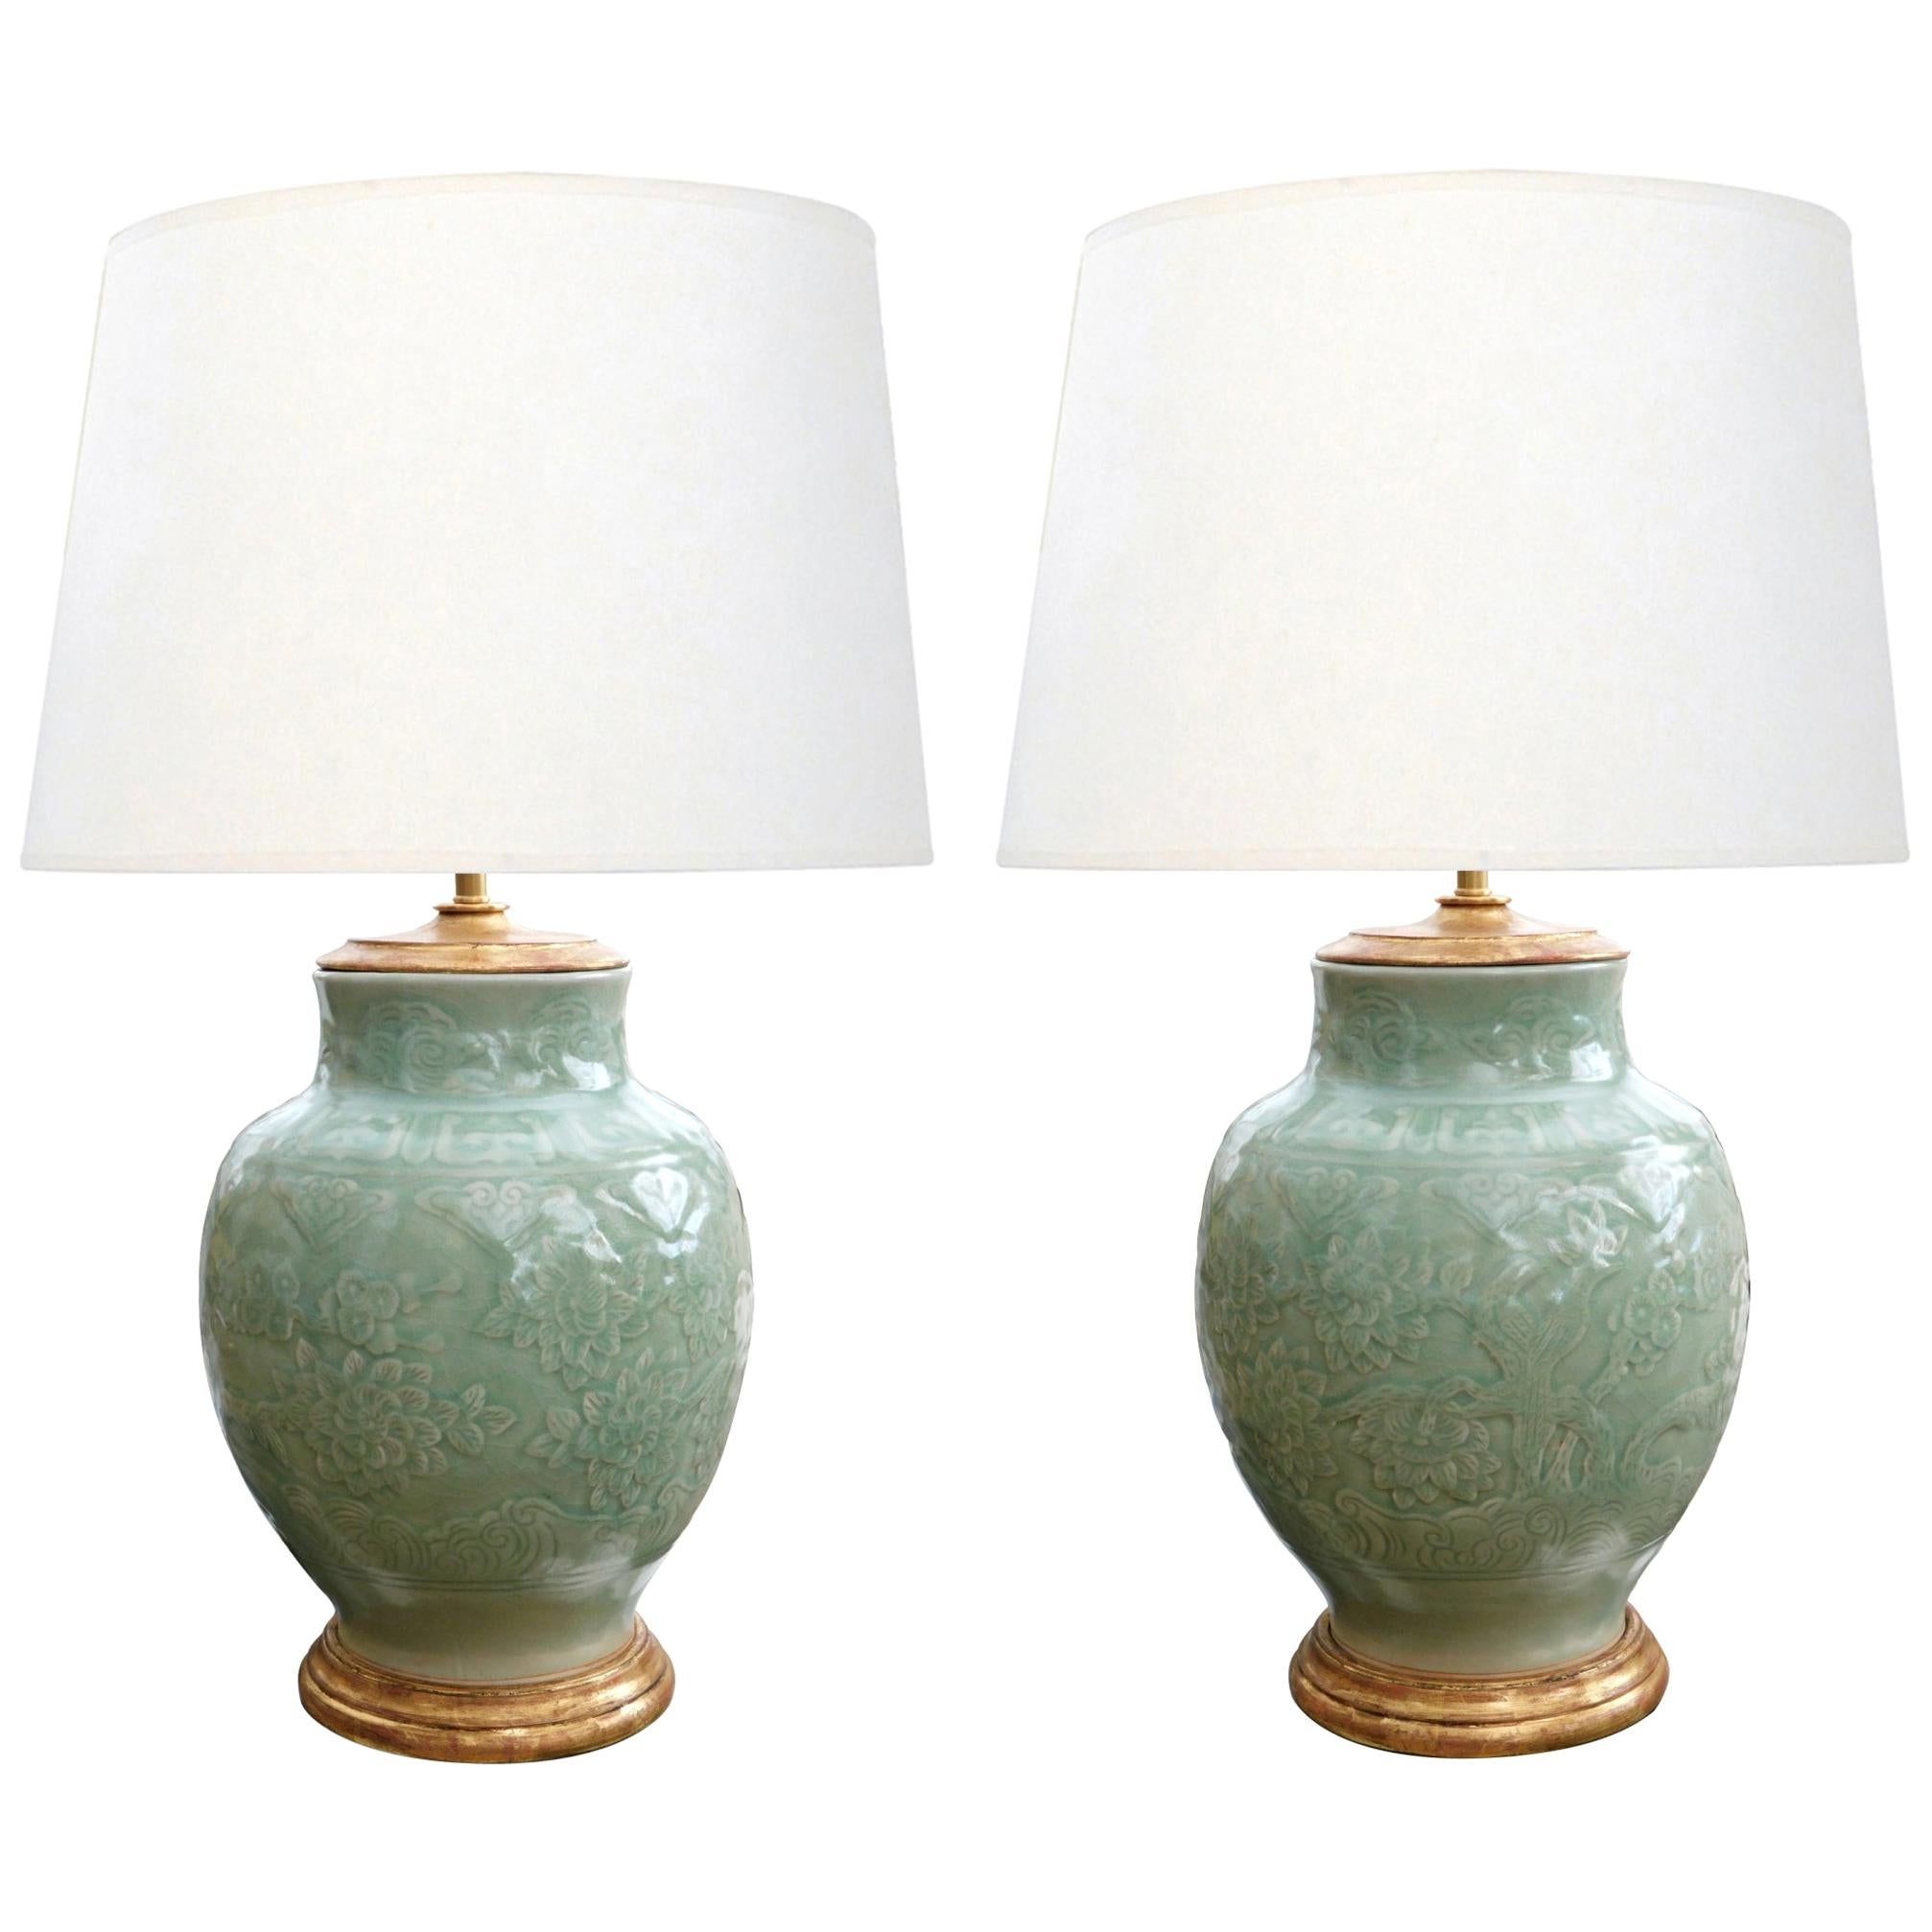 Pair of Chinese Carved Celadon Glazed Ovoid-form Lamps